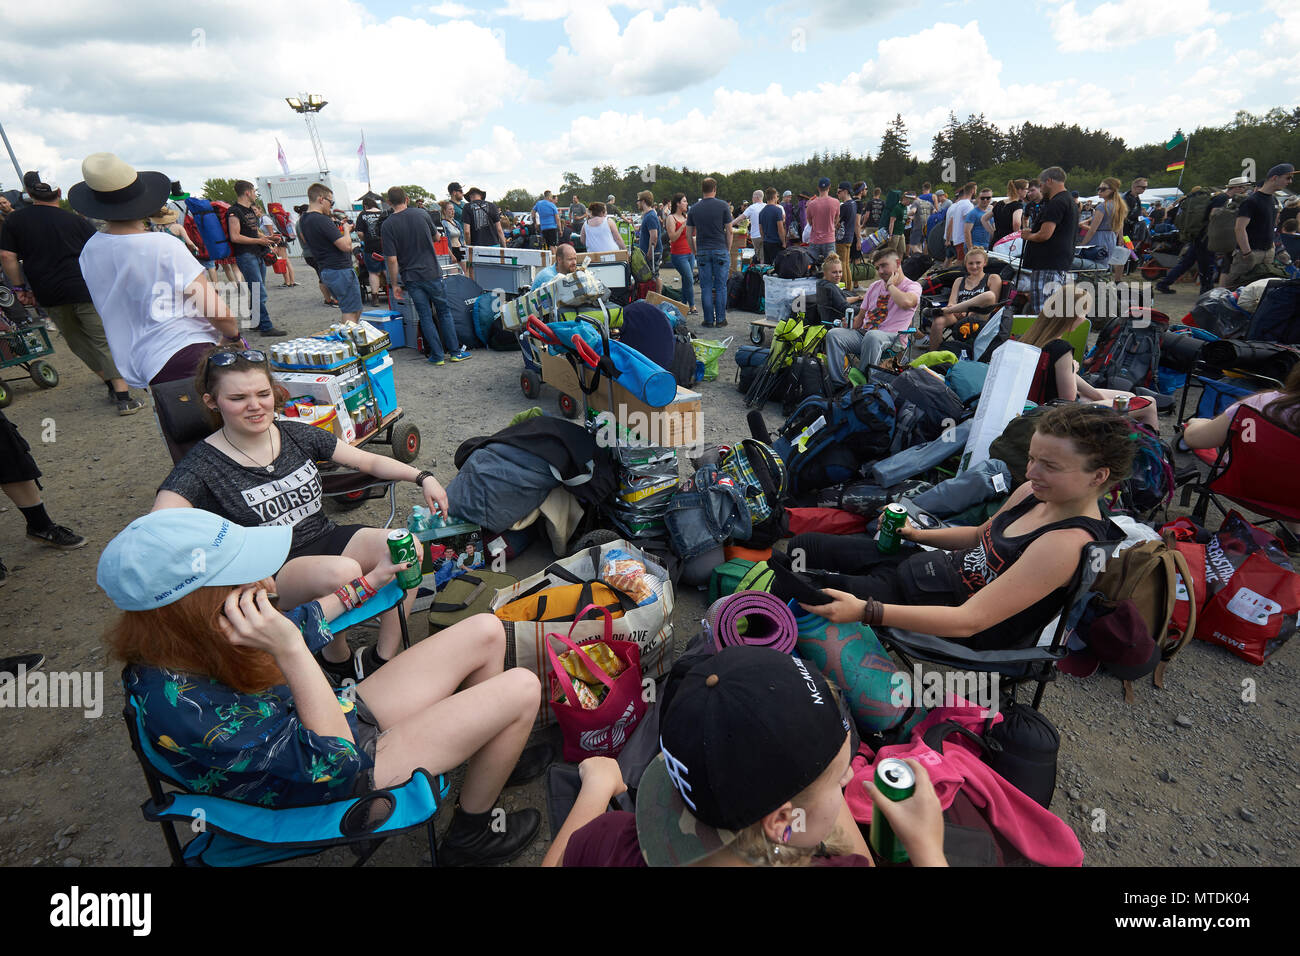 30 May 2018, Germany, Nuremberg: Rock fans arrive with heavy luggage on the camping grounds of the music festival "Rock am Ring". A total 80 bands are lined up to play